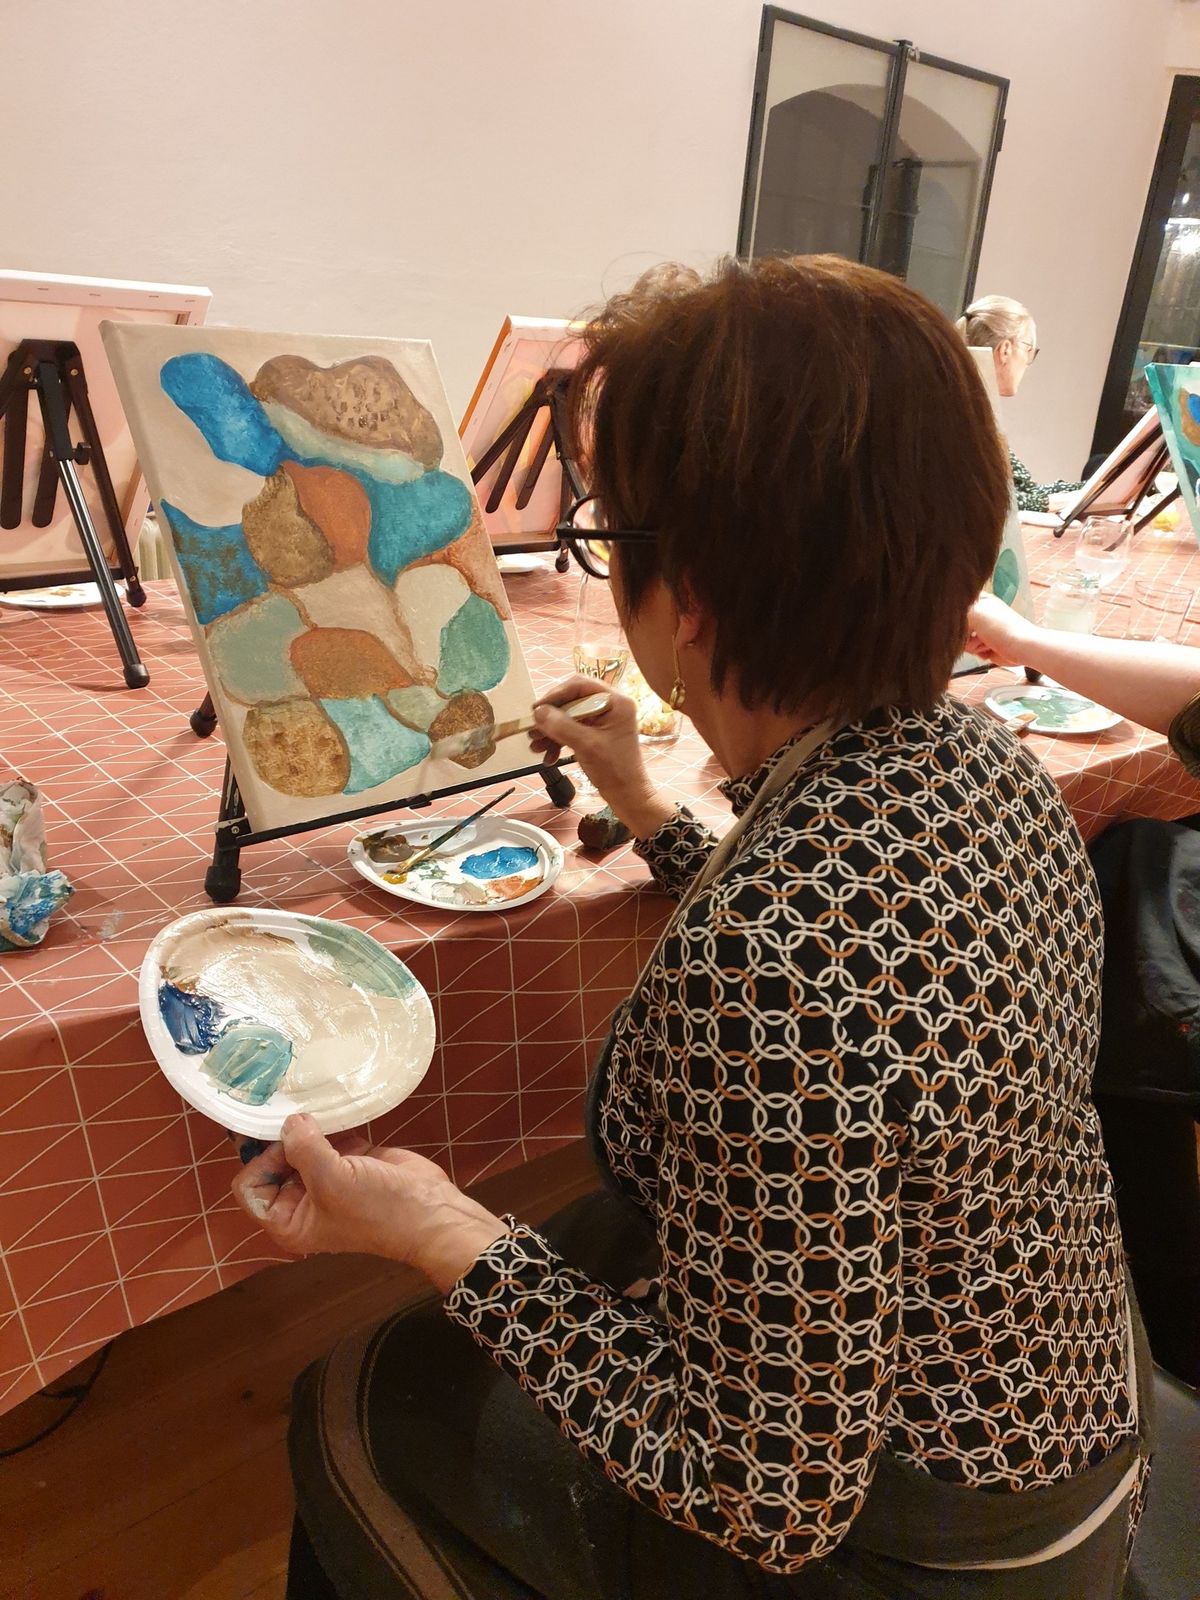 SIP AND CREATE: STRING ART PAINTING EVENT